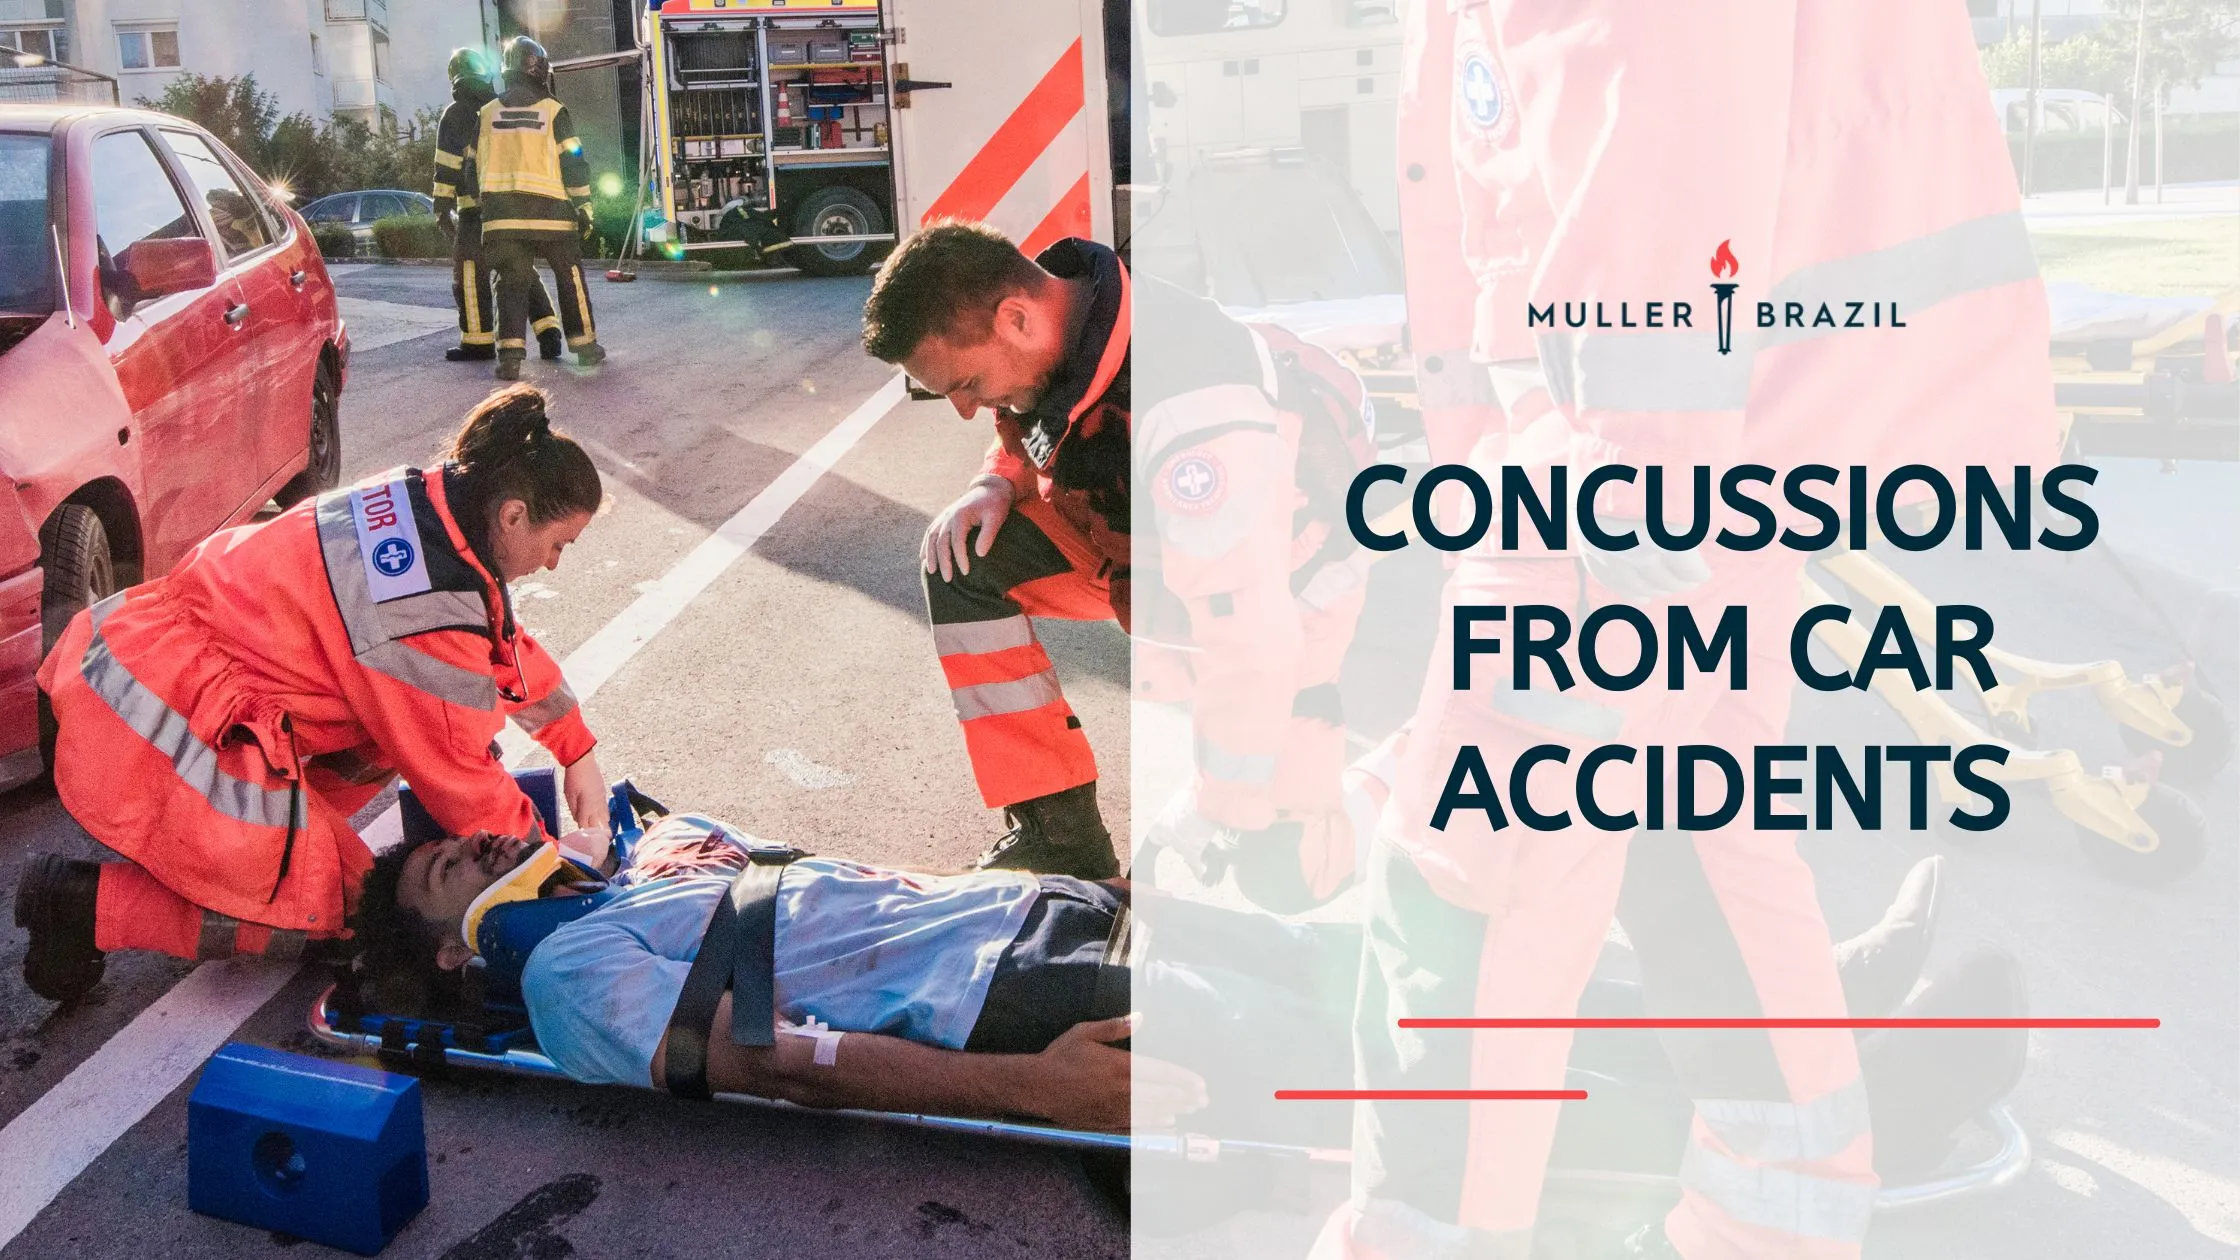 Emergency responders attending to a victim of a car accident, with the bold title 'CONCUSSIONS FROM CAR ACCIDENTS' by Muller Brazil, highlighting the medical and legal aspects of vehicular injuries.